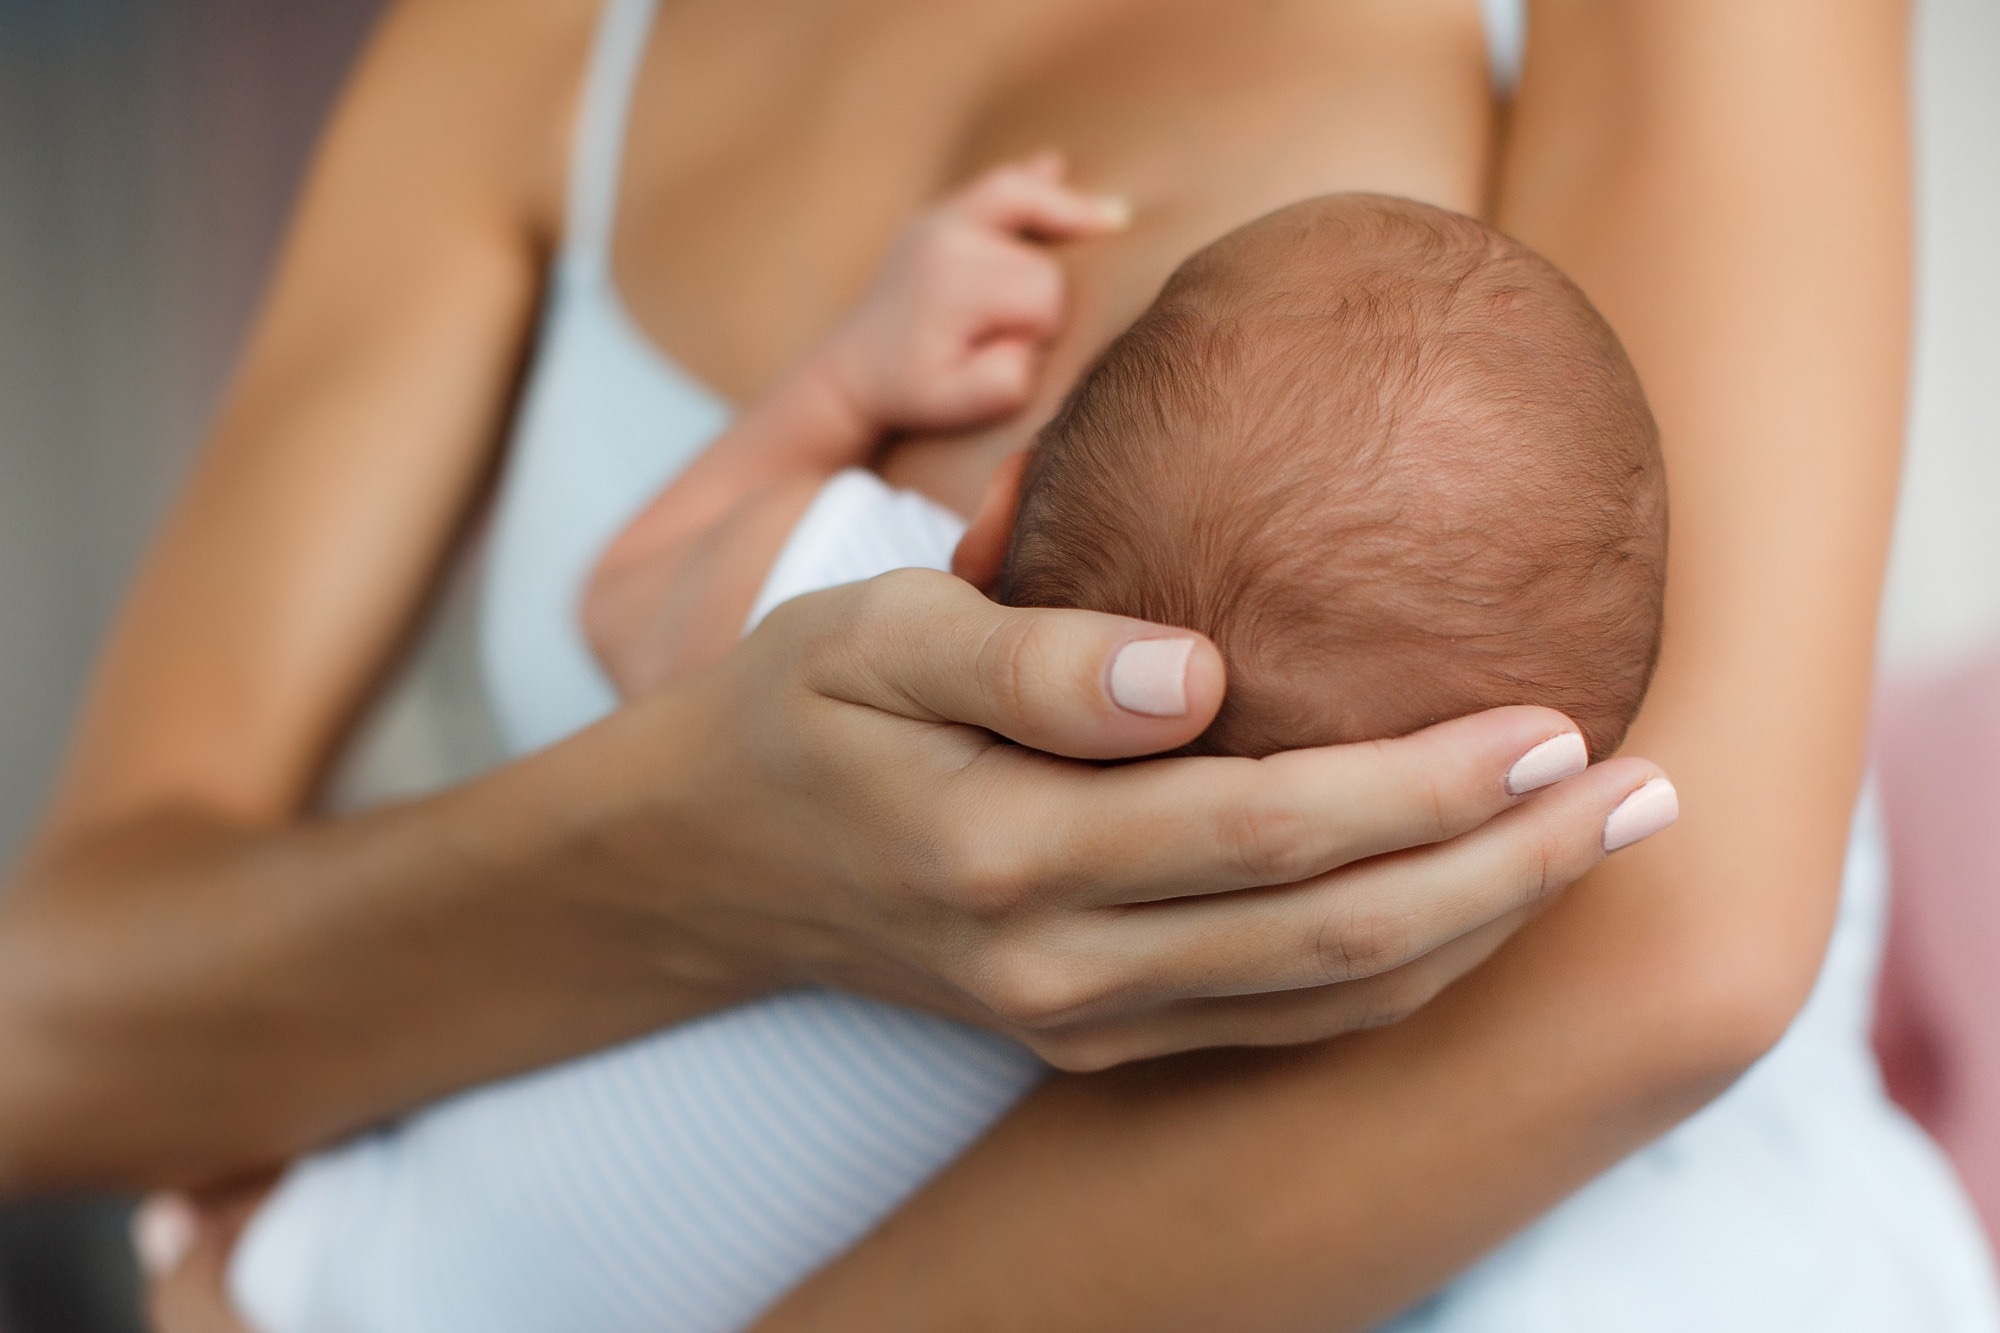 Study shows mother’s milk proteins and carbs crucial for infant growth, fat less so